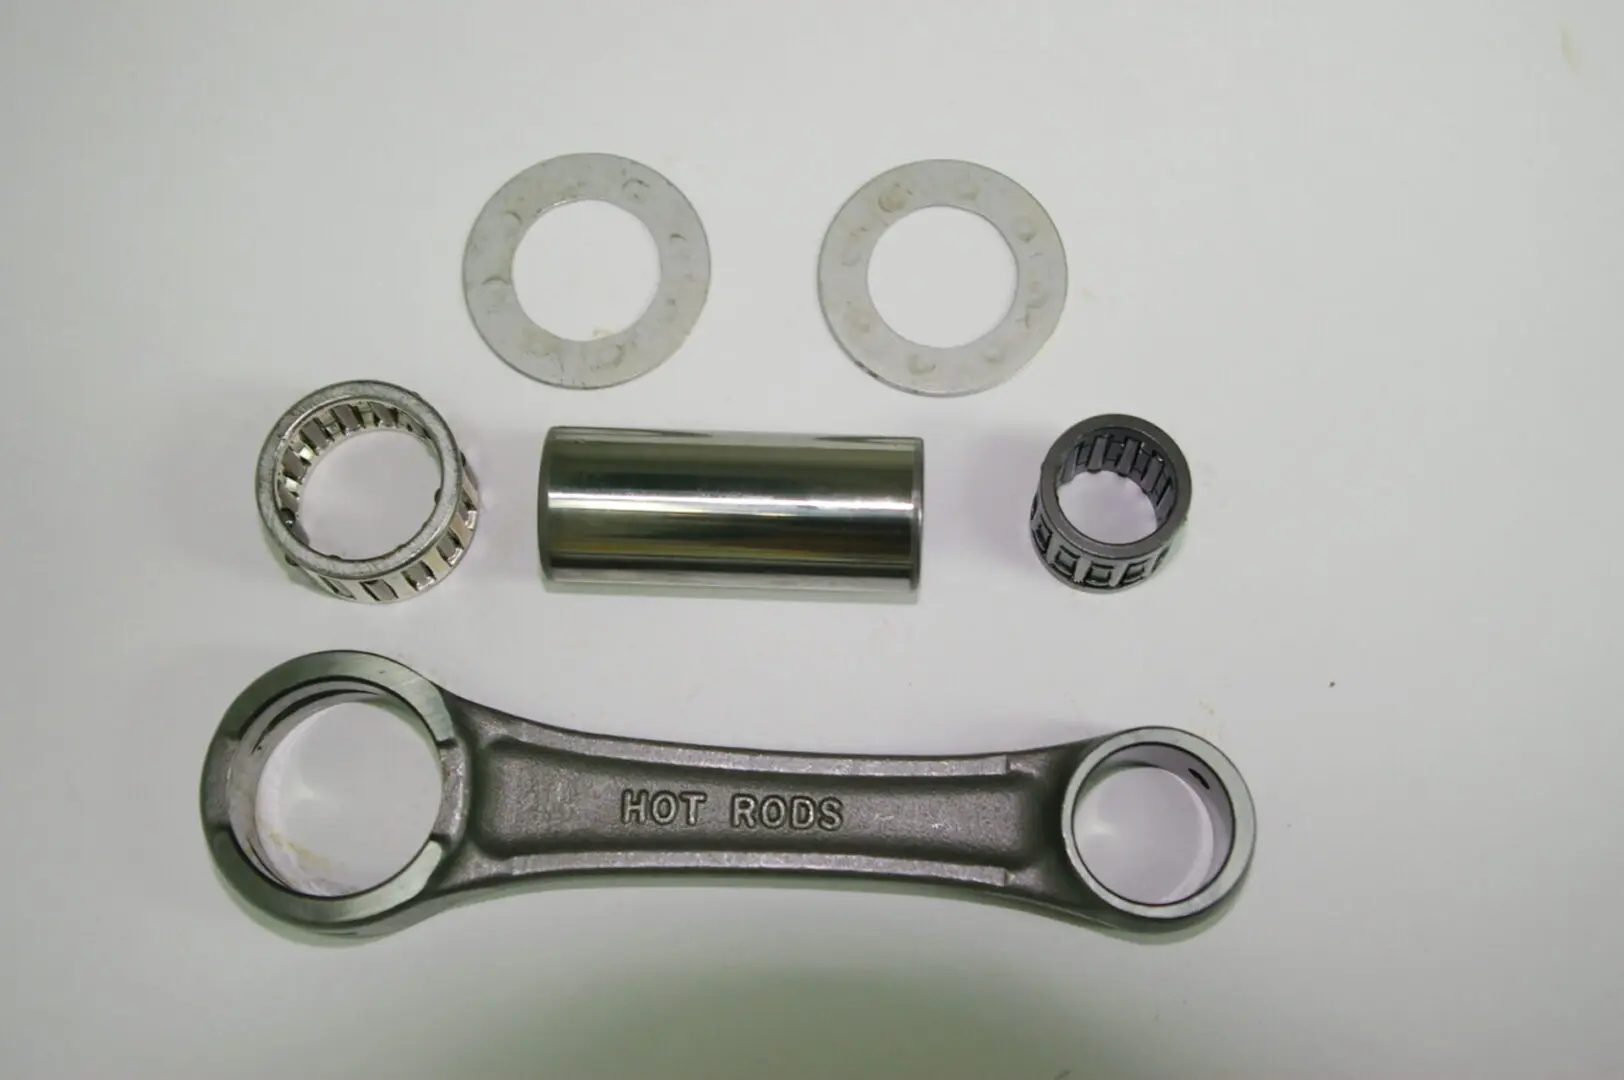 A set of metal parts including a sprocket and HOT RODS Connecting Rod Stock 110mm length, Part# 91-5715.